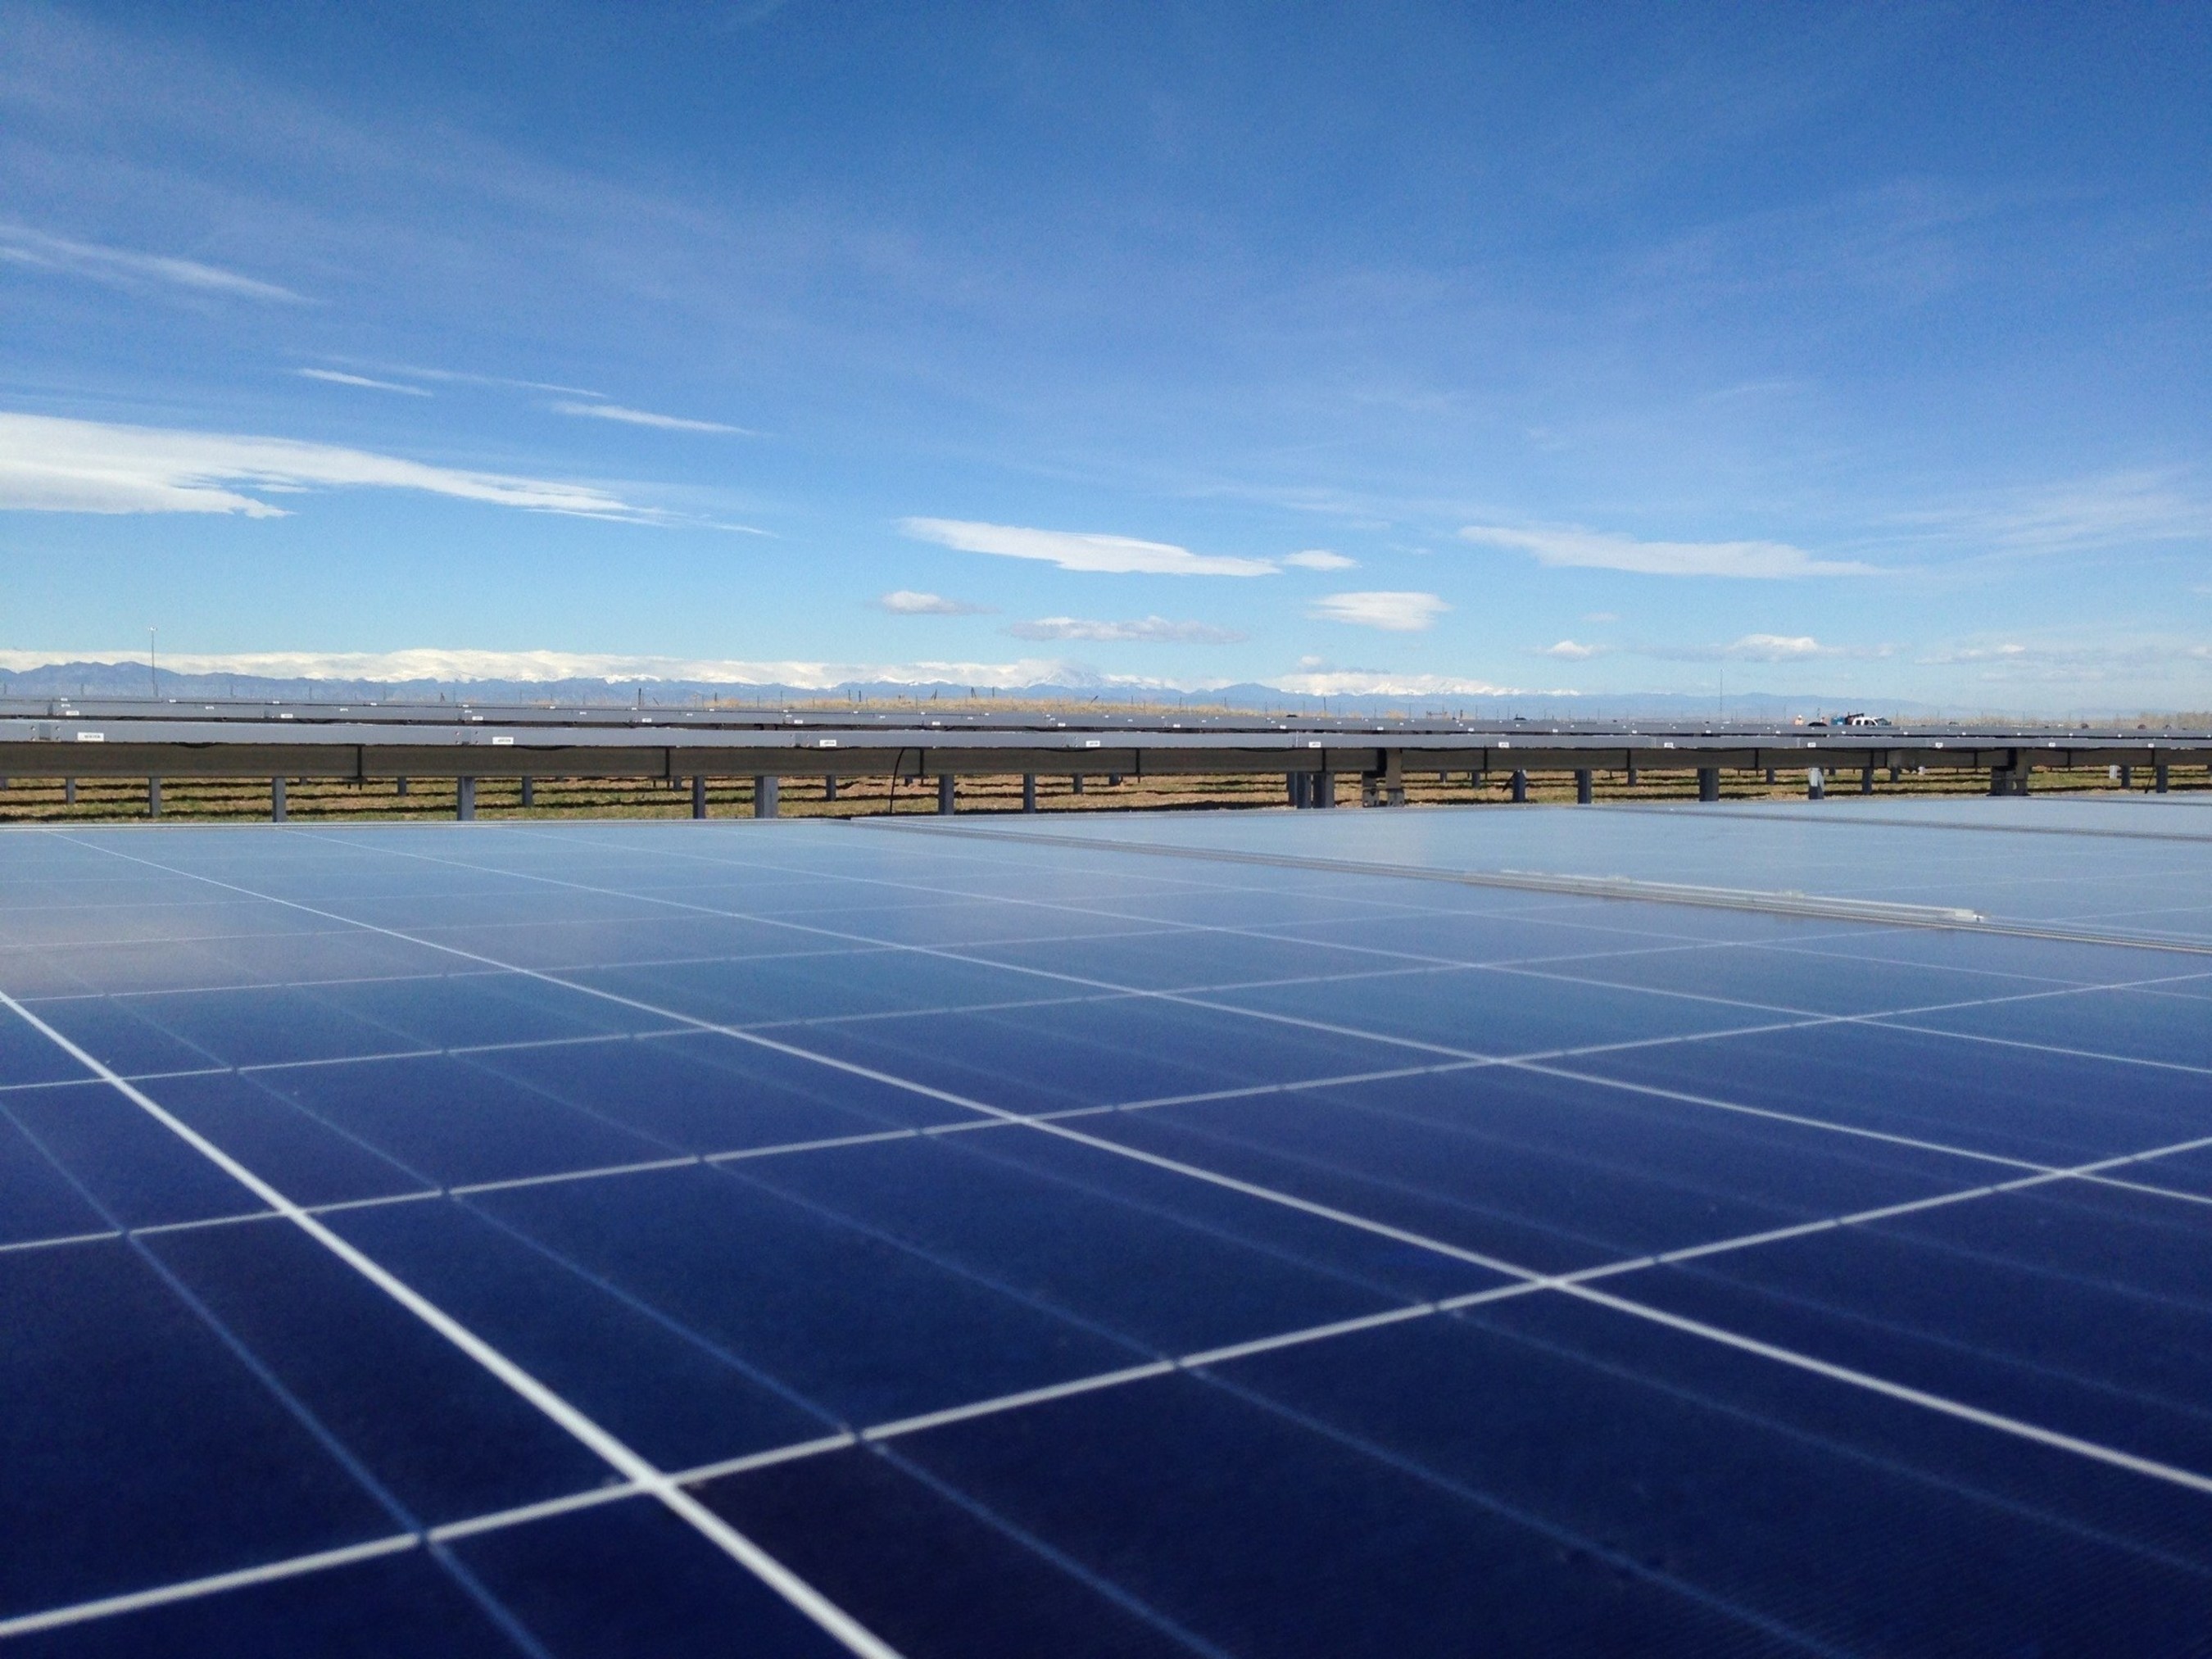 Completed Community Solar Garden outside of Denver International Airport. This project is the first of five planned in Colorado as a result of the partnership between NRG Renew and SunShare, and was unveiled on April 17, 2015 by Governor Hickenlooper.  In total, the project portfolio will feature thousands of photovoltaic solar panels covering 123 acres and totaling 8.2 Megawatts